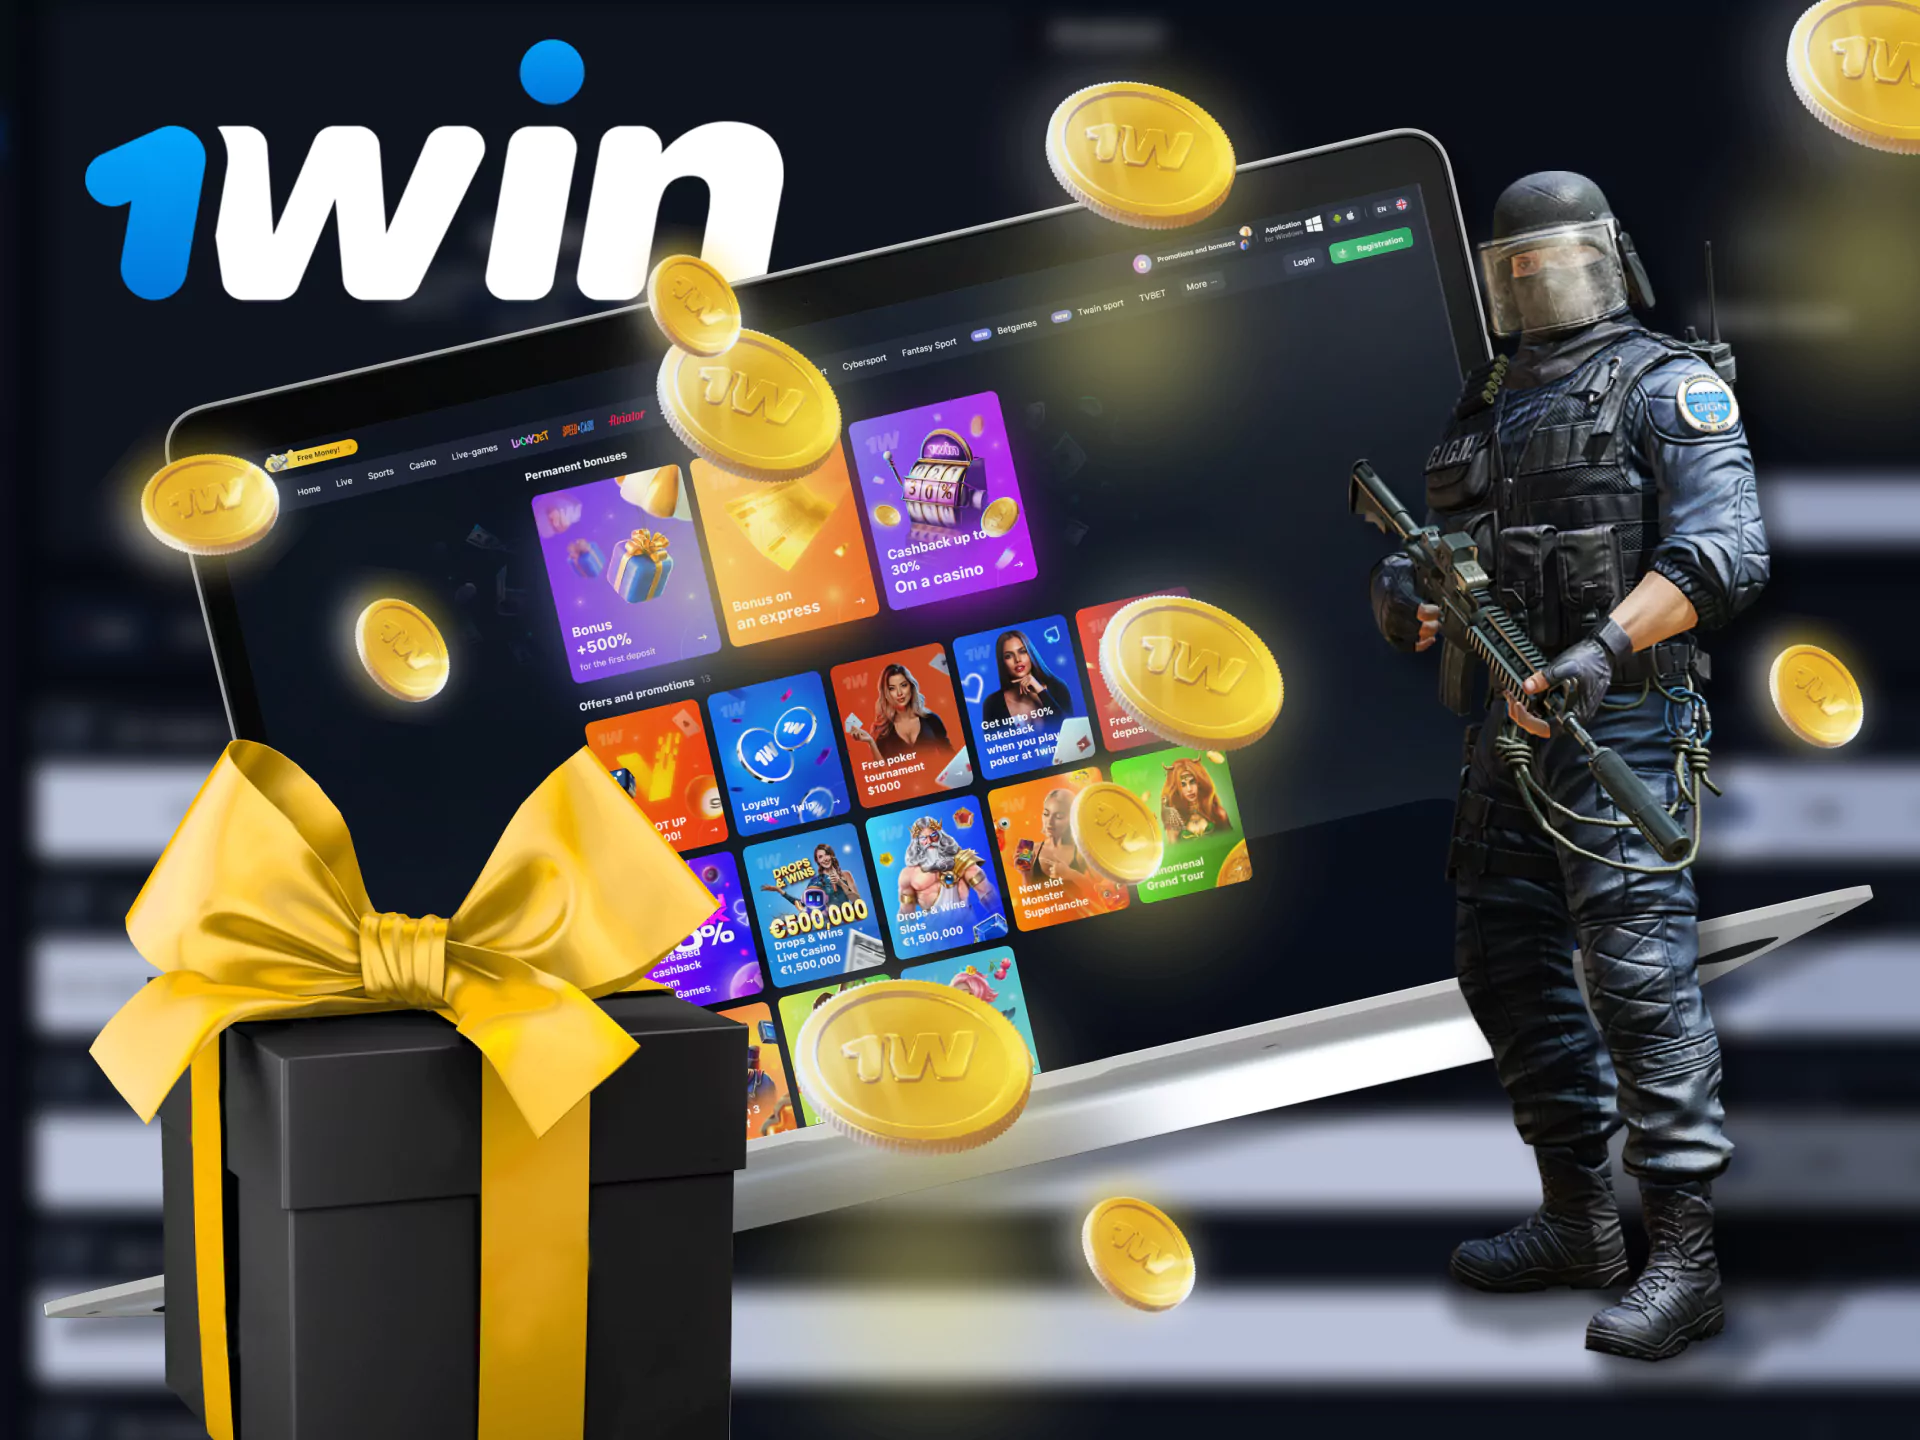 At 1Win you get a special bonus for betting.